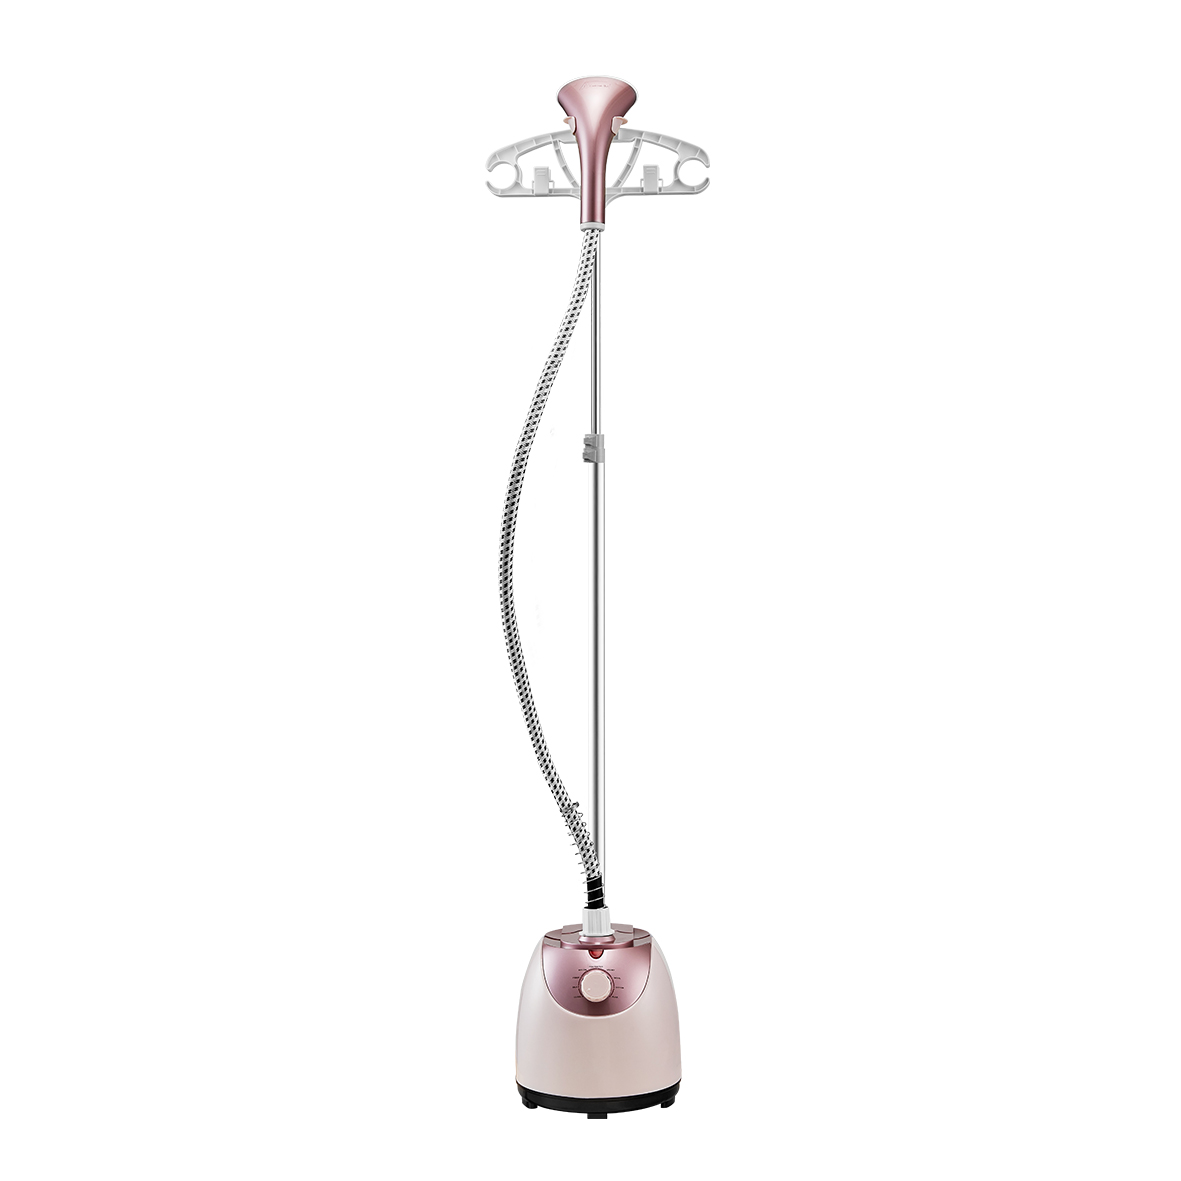 ECO-1824T Garment Steamer for Wrinkle-Free Clothes